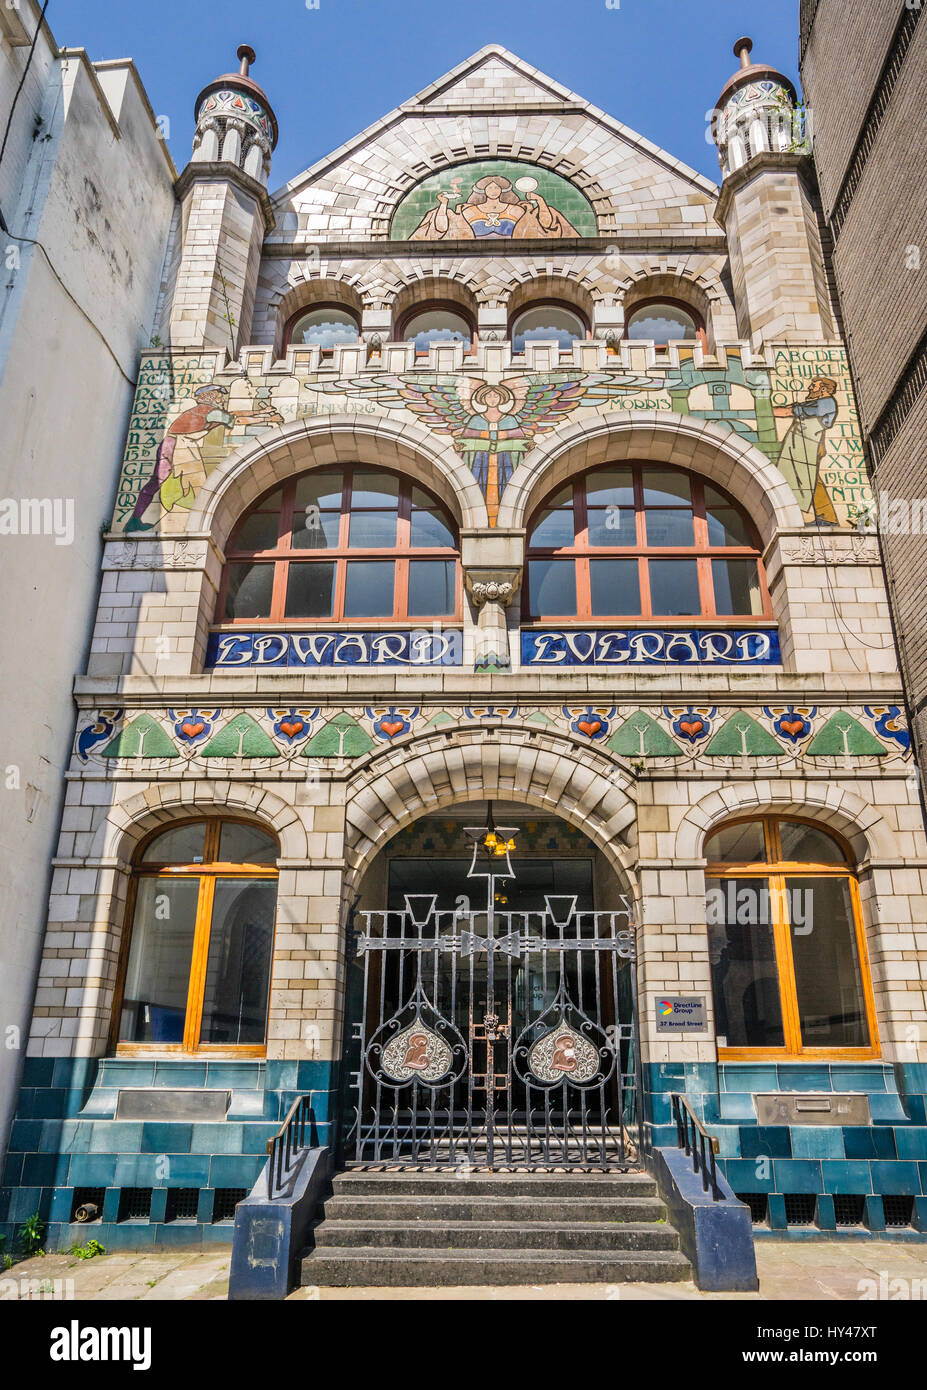 United Kingdom, South West England, Bristol, exhuberant faience frontage of the Edward Everard Building in Broad Street, facade of a former printing w Stock Photo